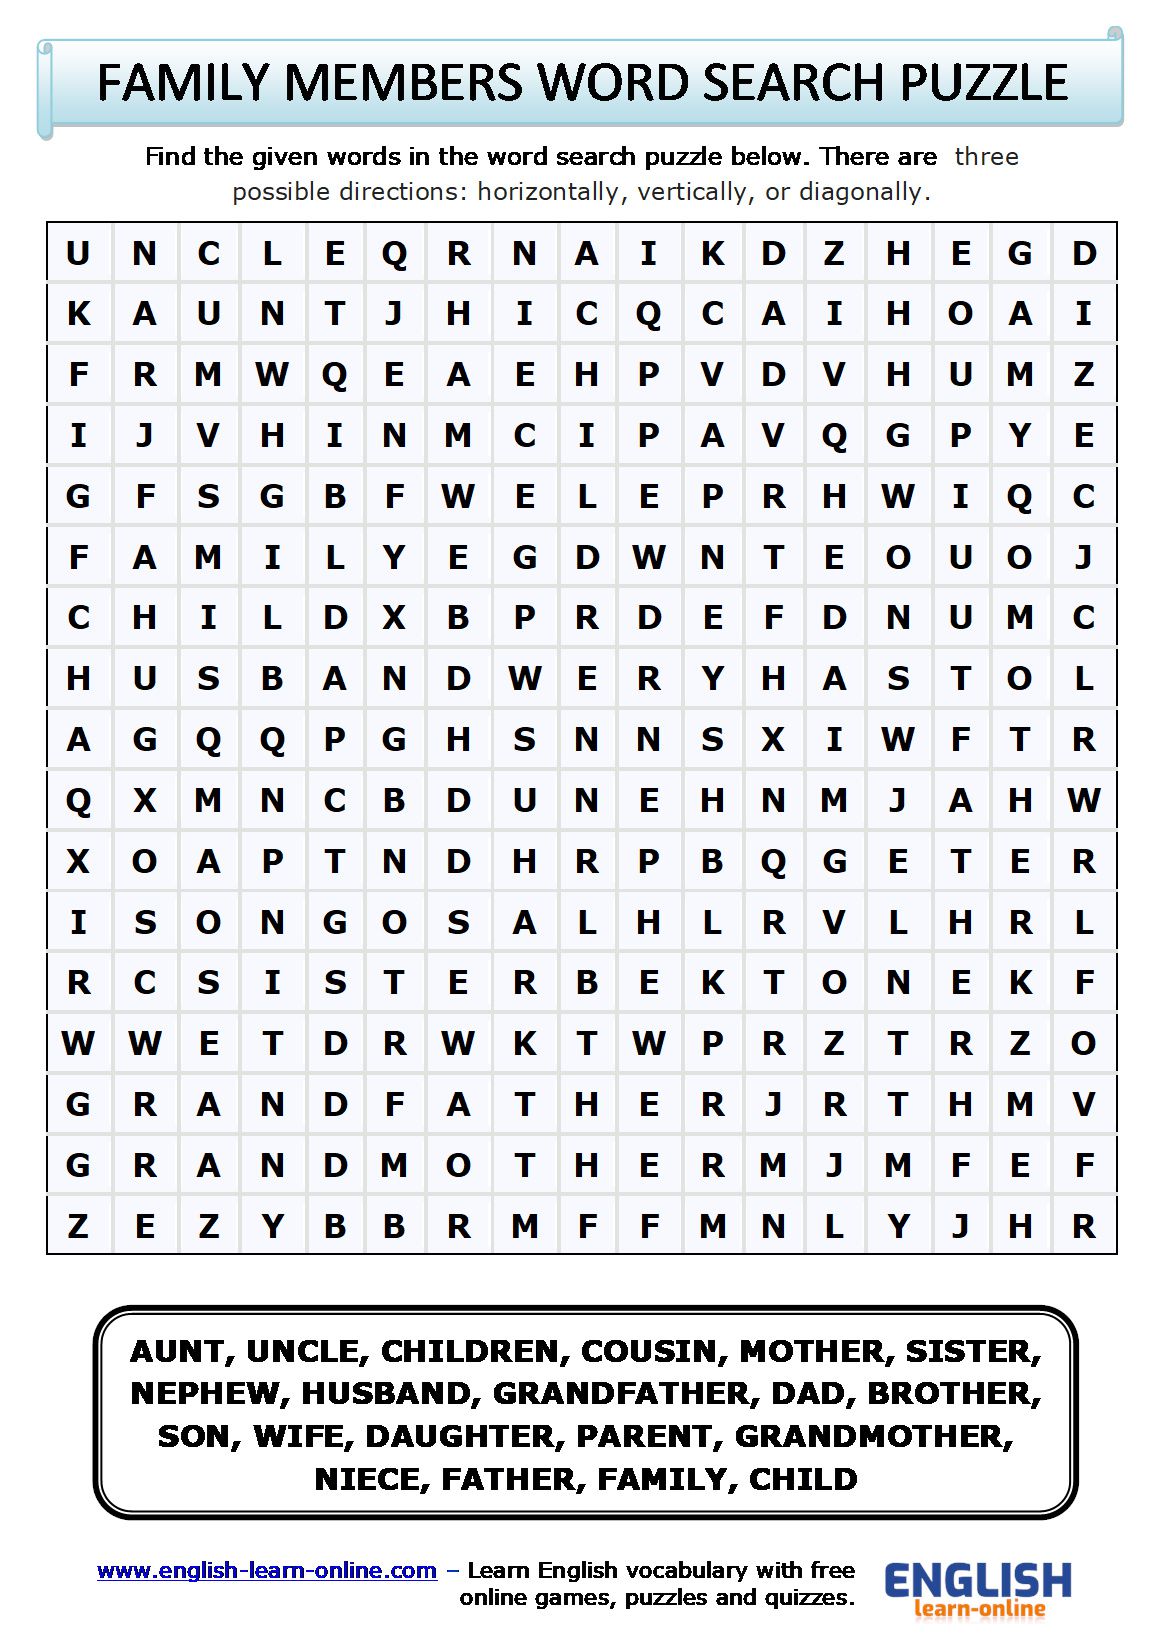 Family words english. Weather Word search. My Family Wordsearch. Word search Family members. Family members Wordsearch.